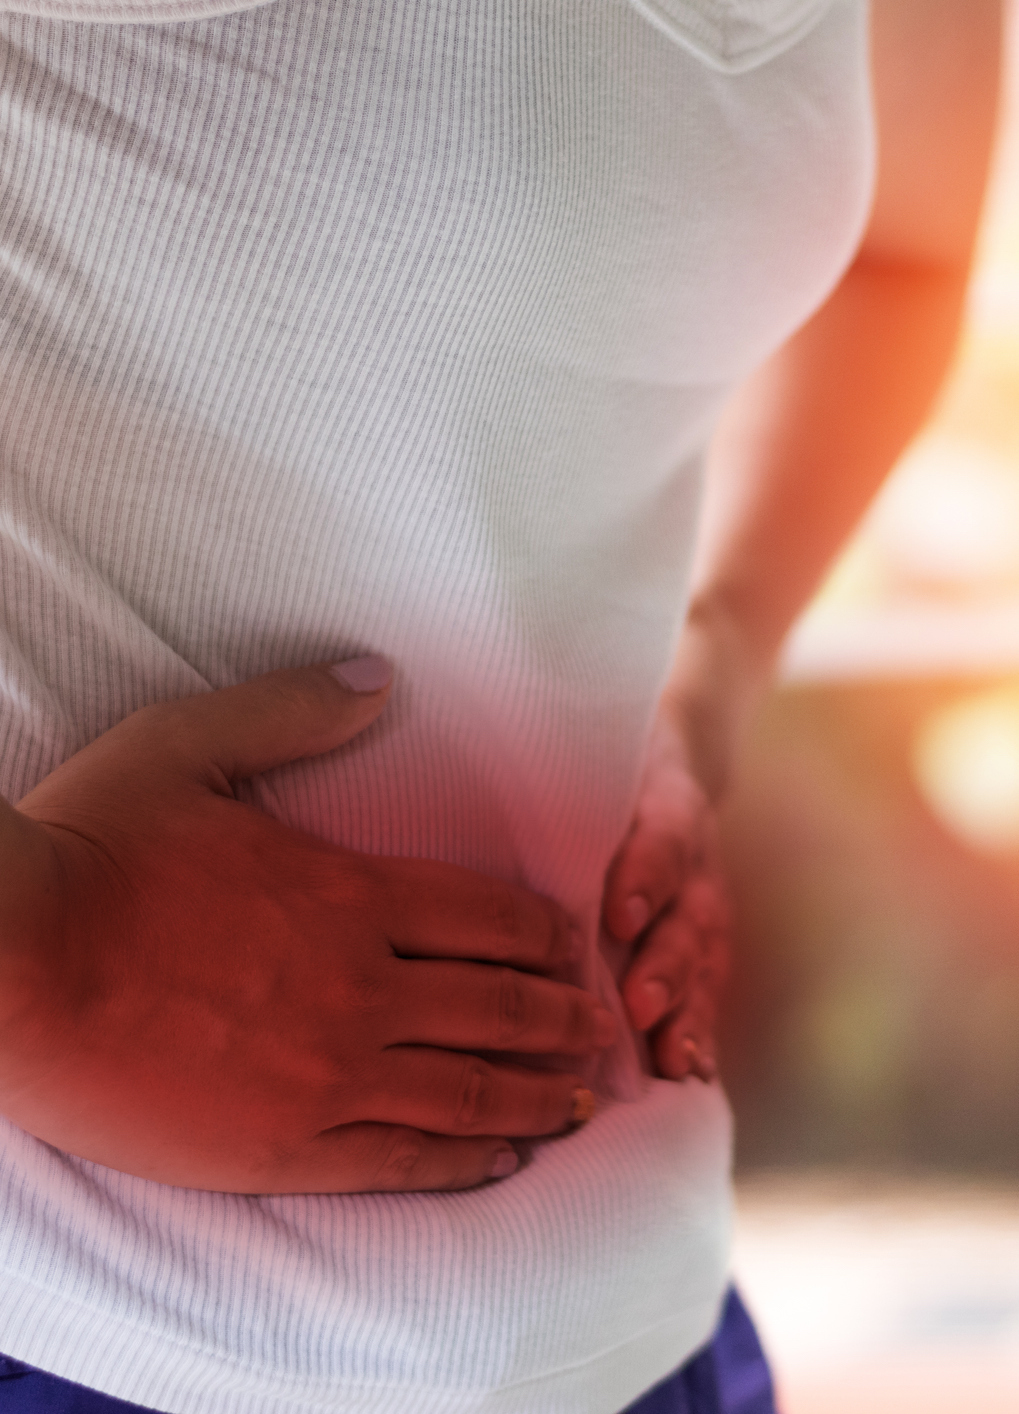 Will a Hernia Go Away on Its Own?